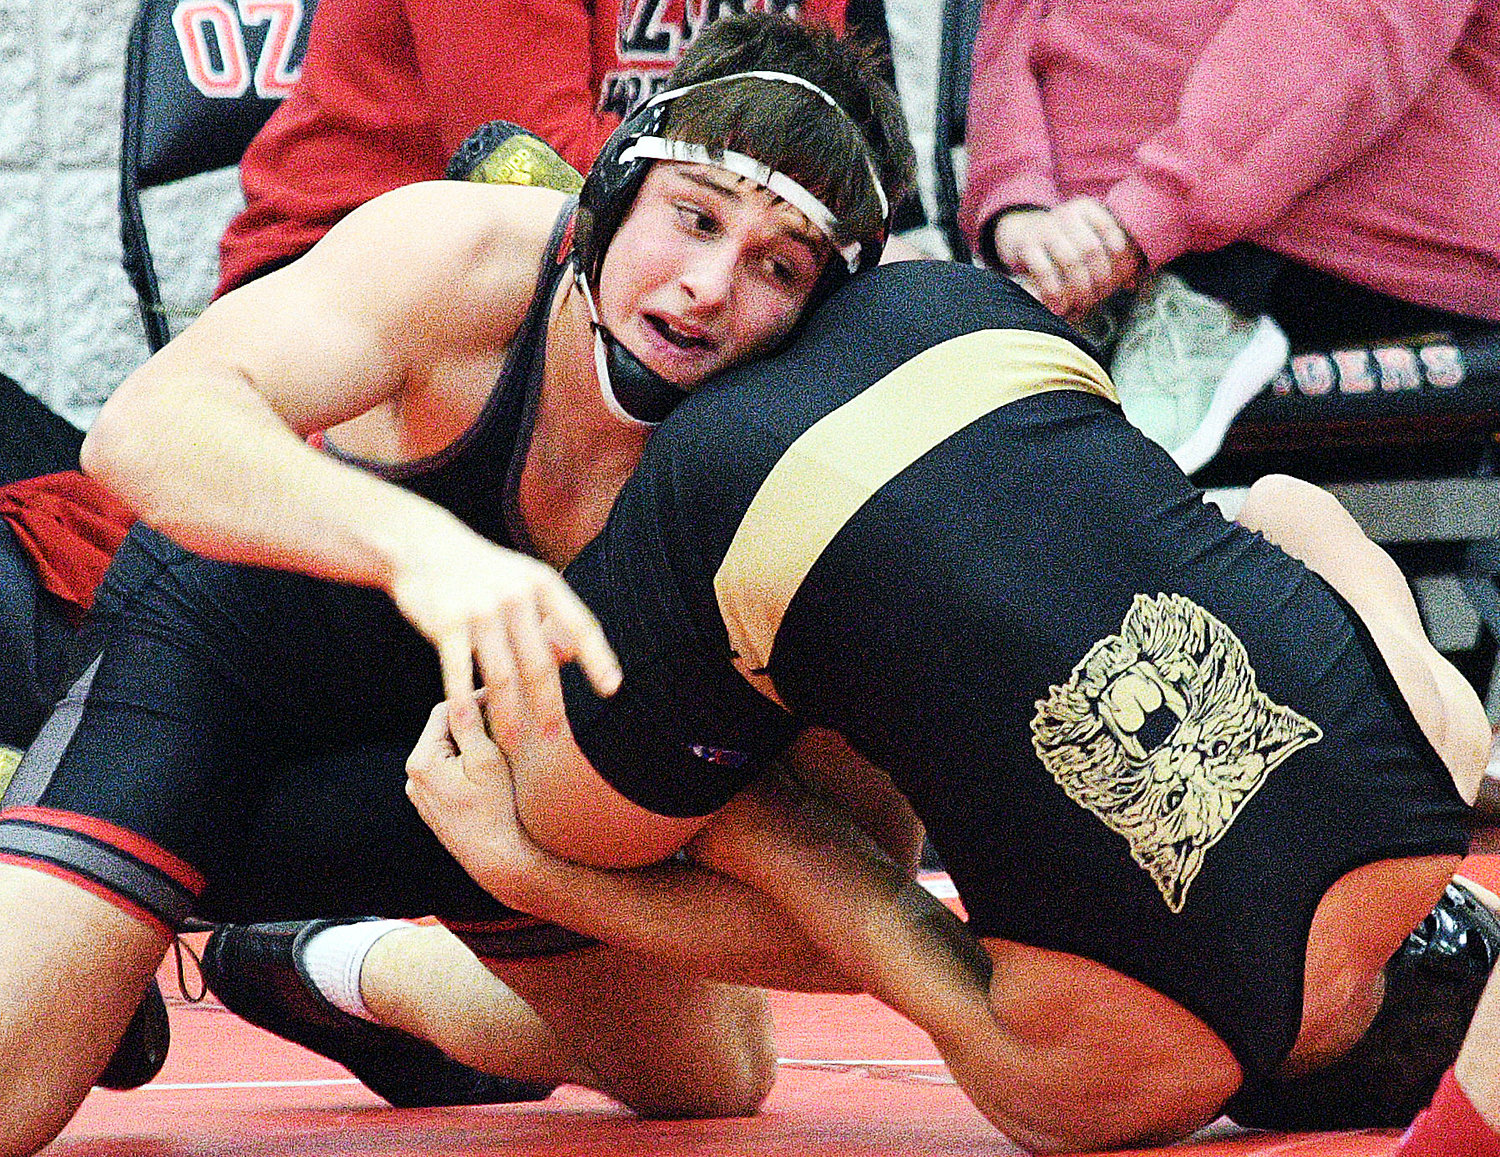 BRAXTON STRICK is looking to become a three-time District champ.